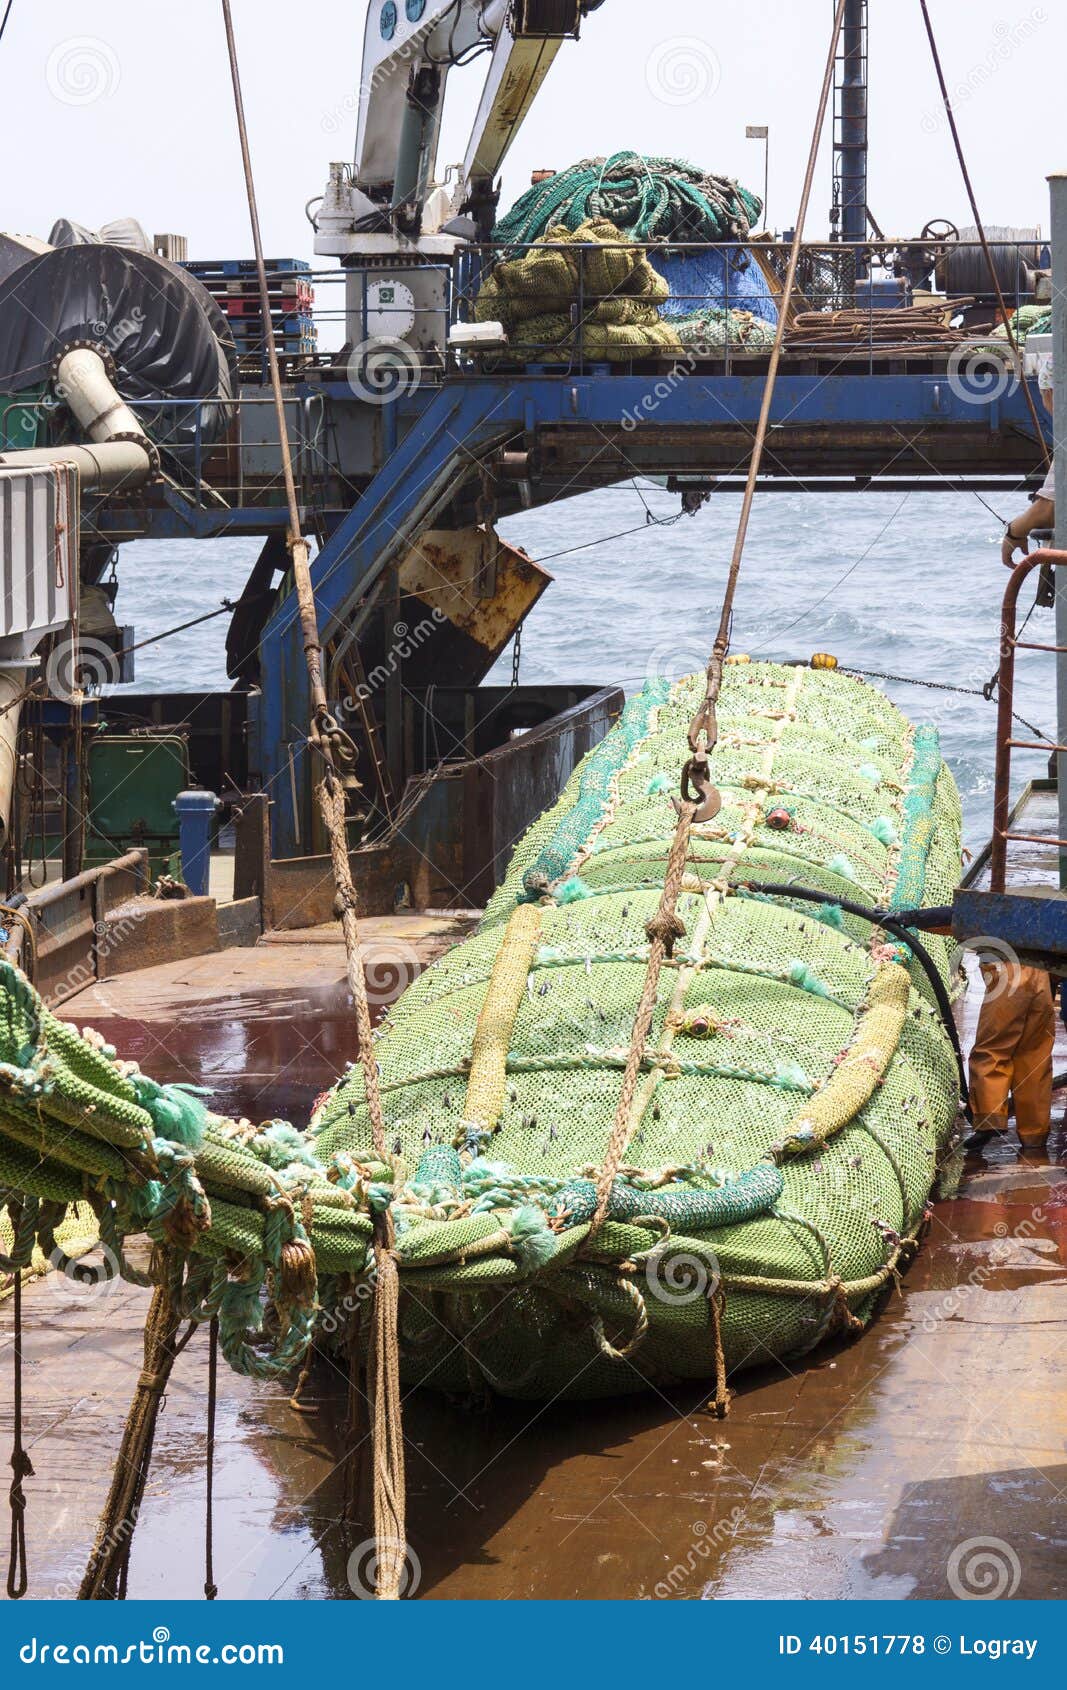 Fishing Vessel. Great Catch of Fish in Thrall Stock Photo - Image